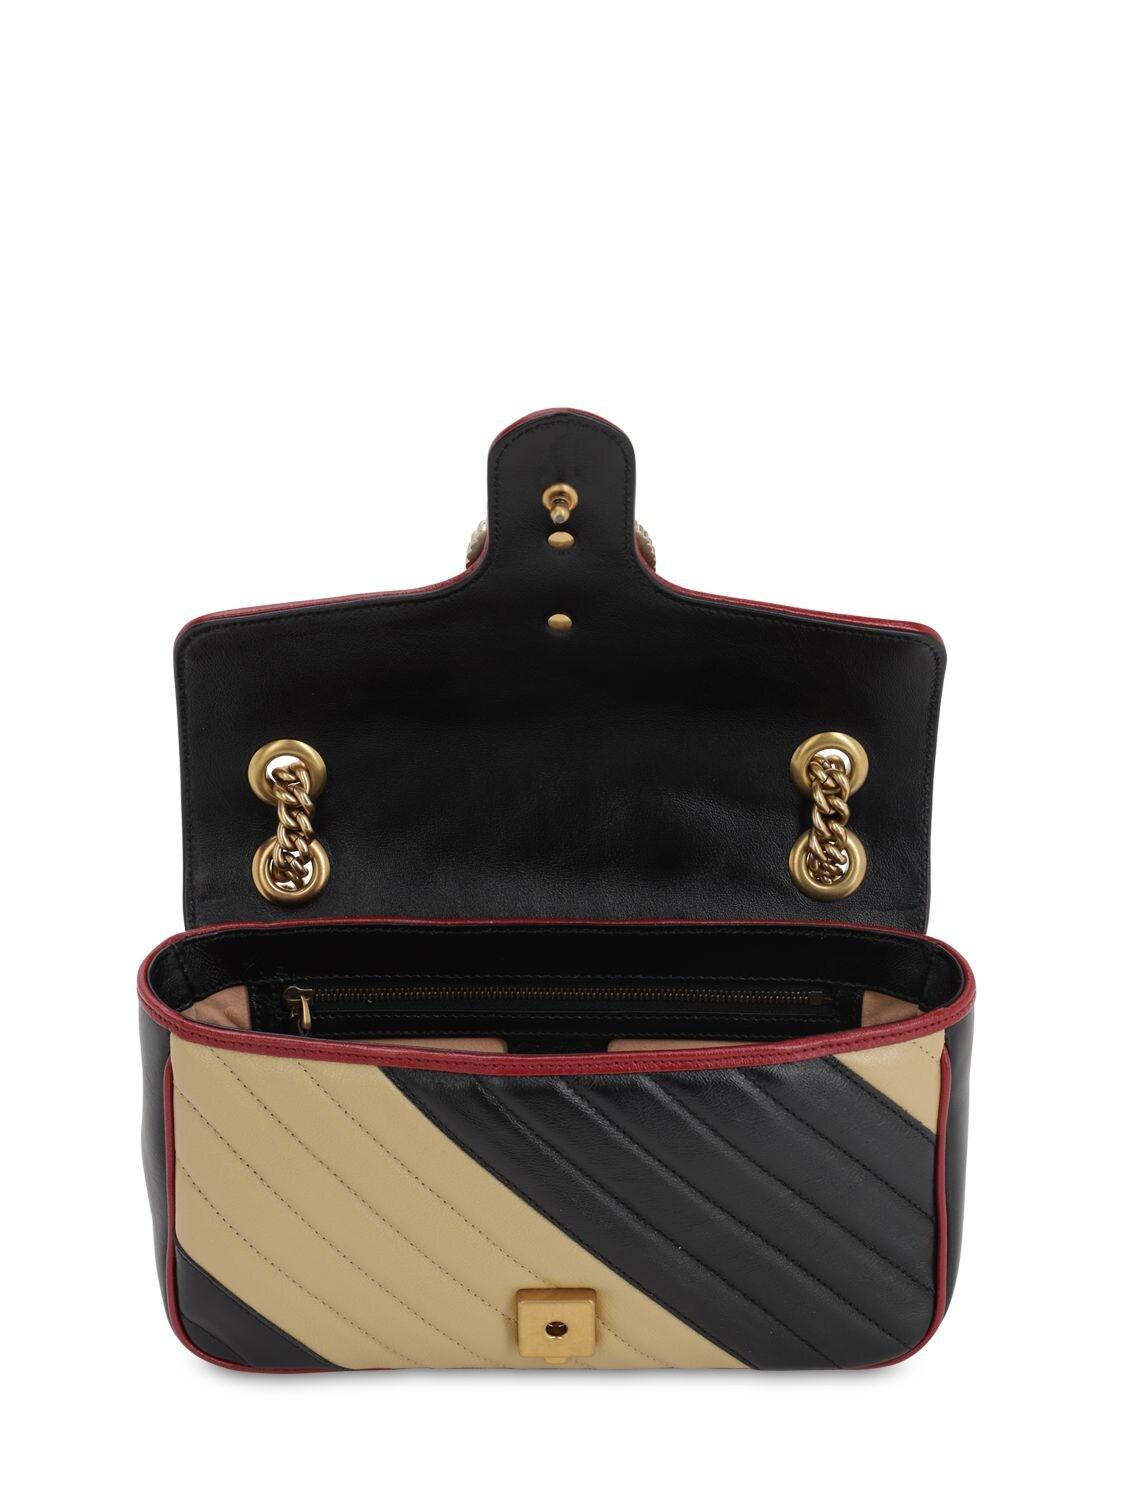 Black GG Marmont 2.0 small leather cross-body bag, Gucci